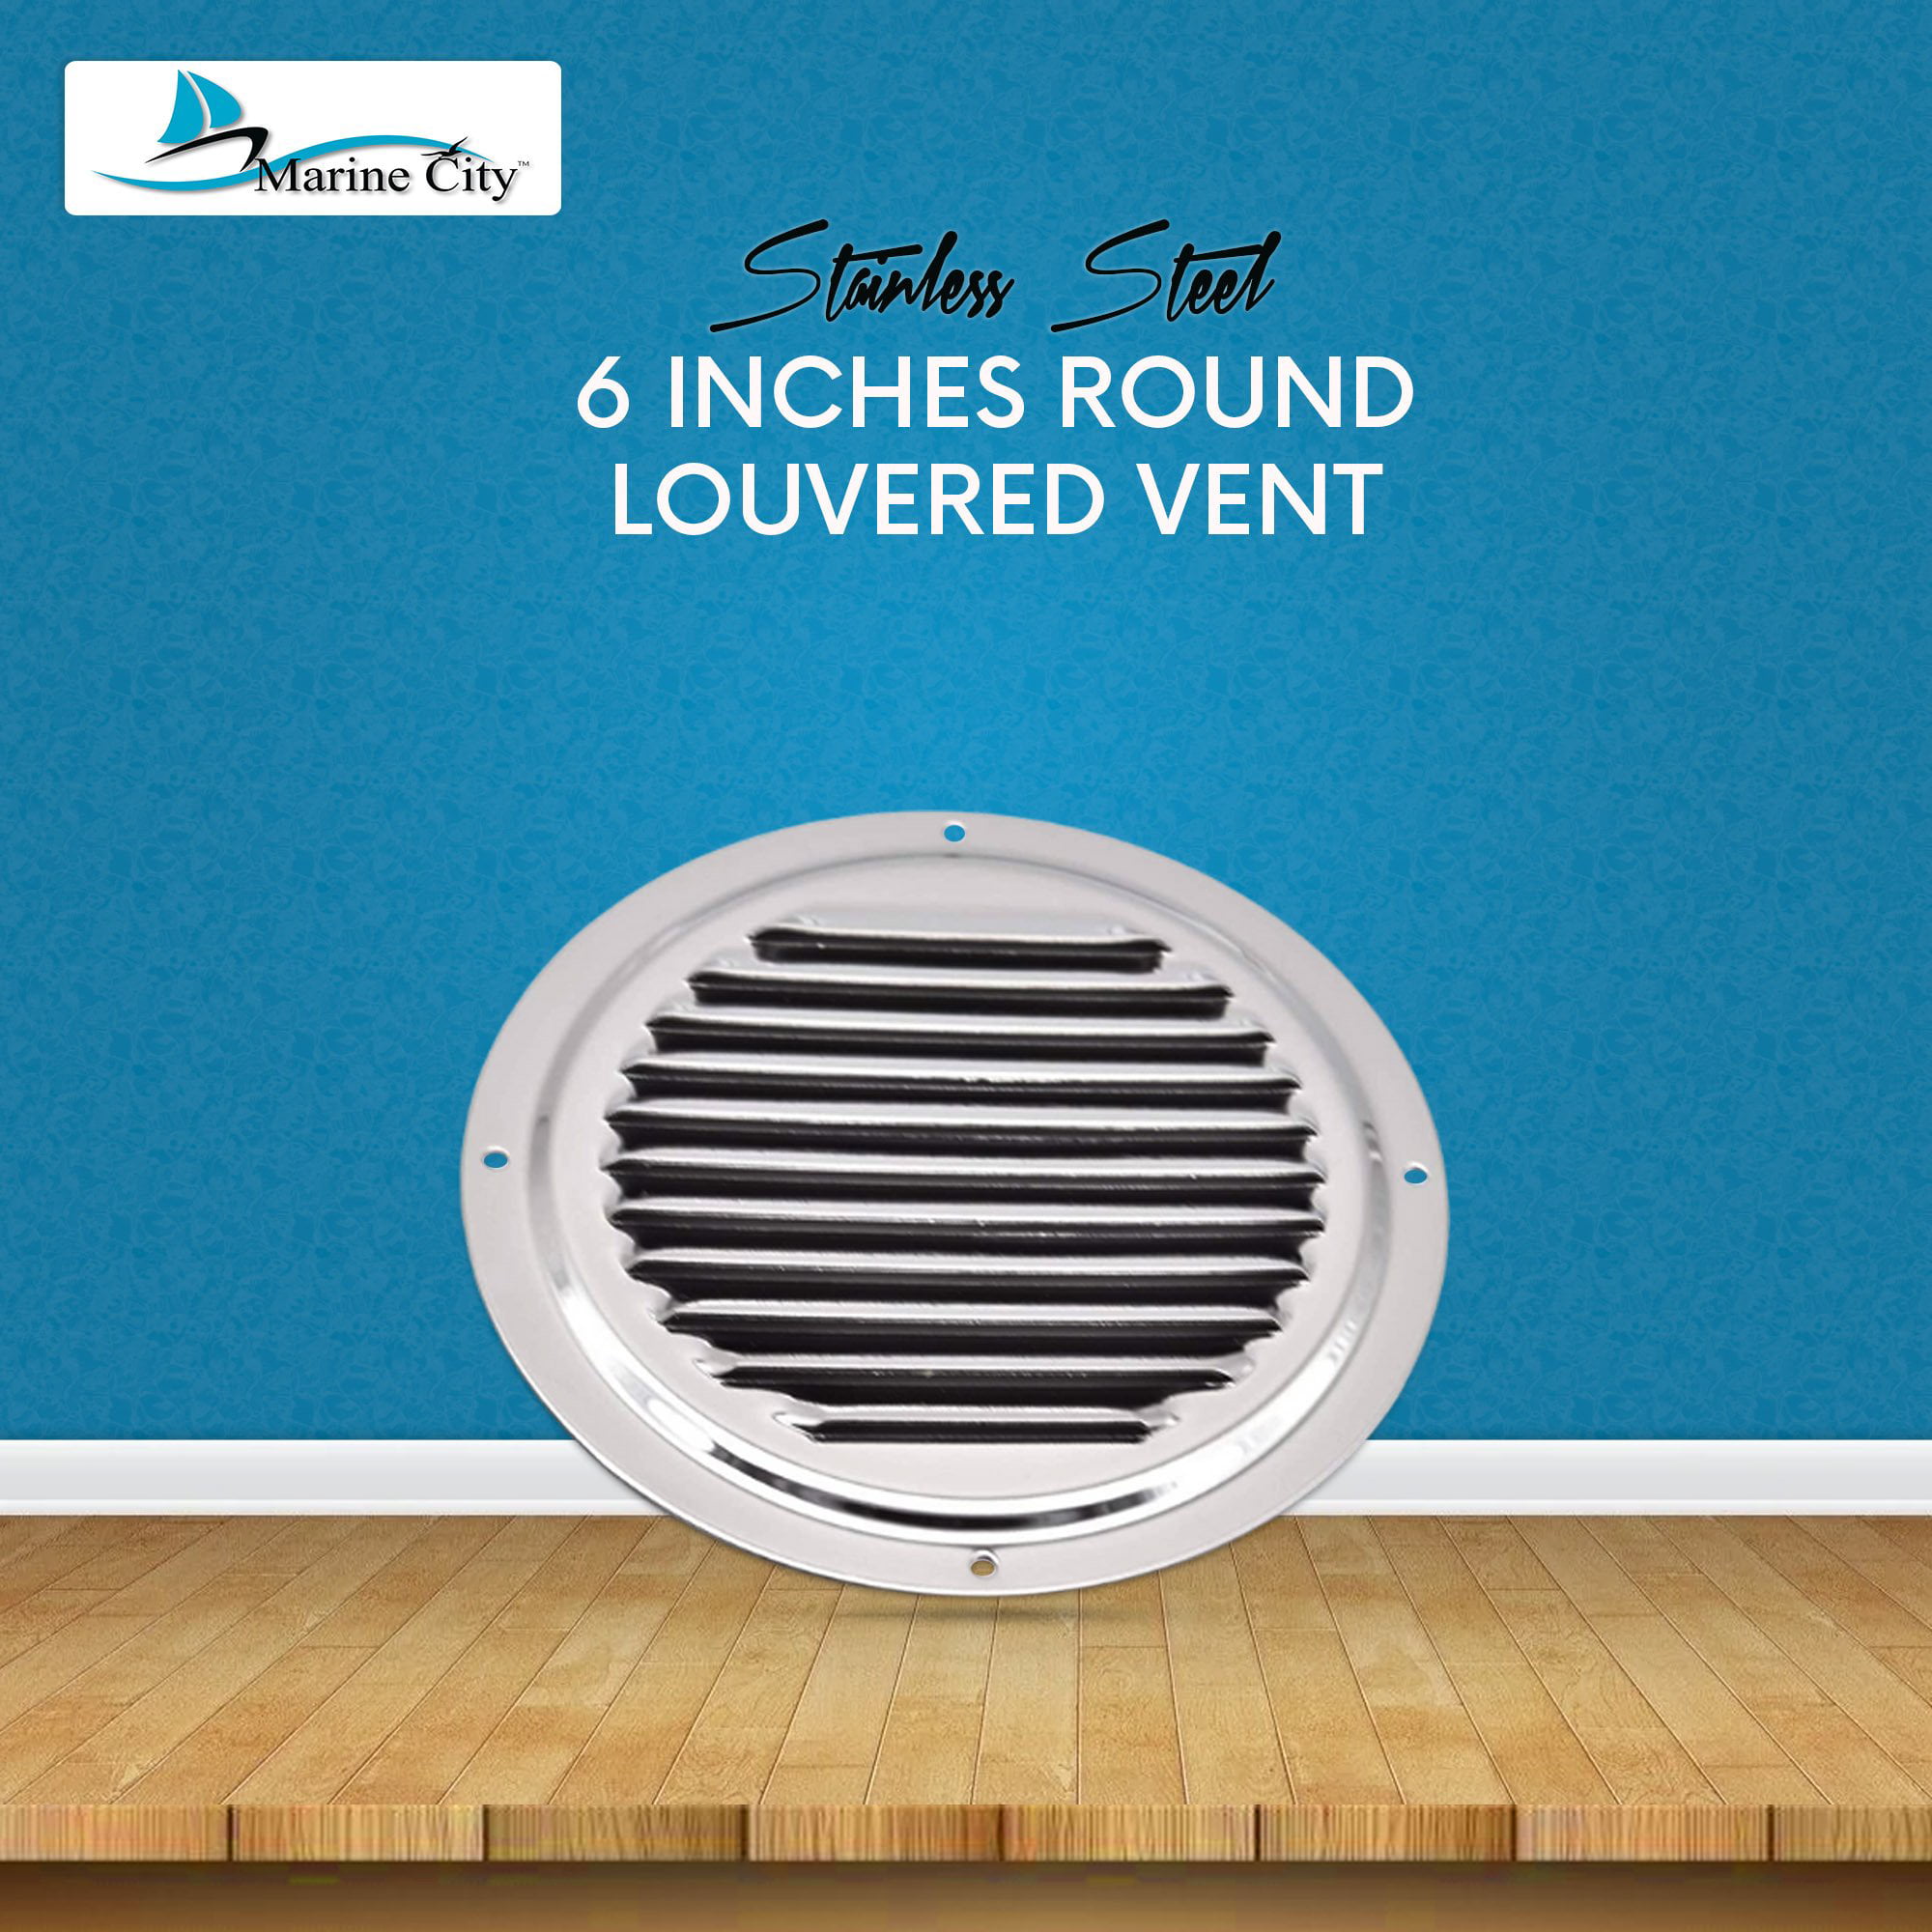 Marine City Stainless-Steel 4 Inches/ 5 Inches/ 6 Inches Round Louvered Vent...